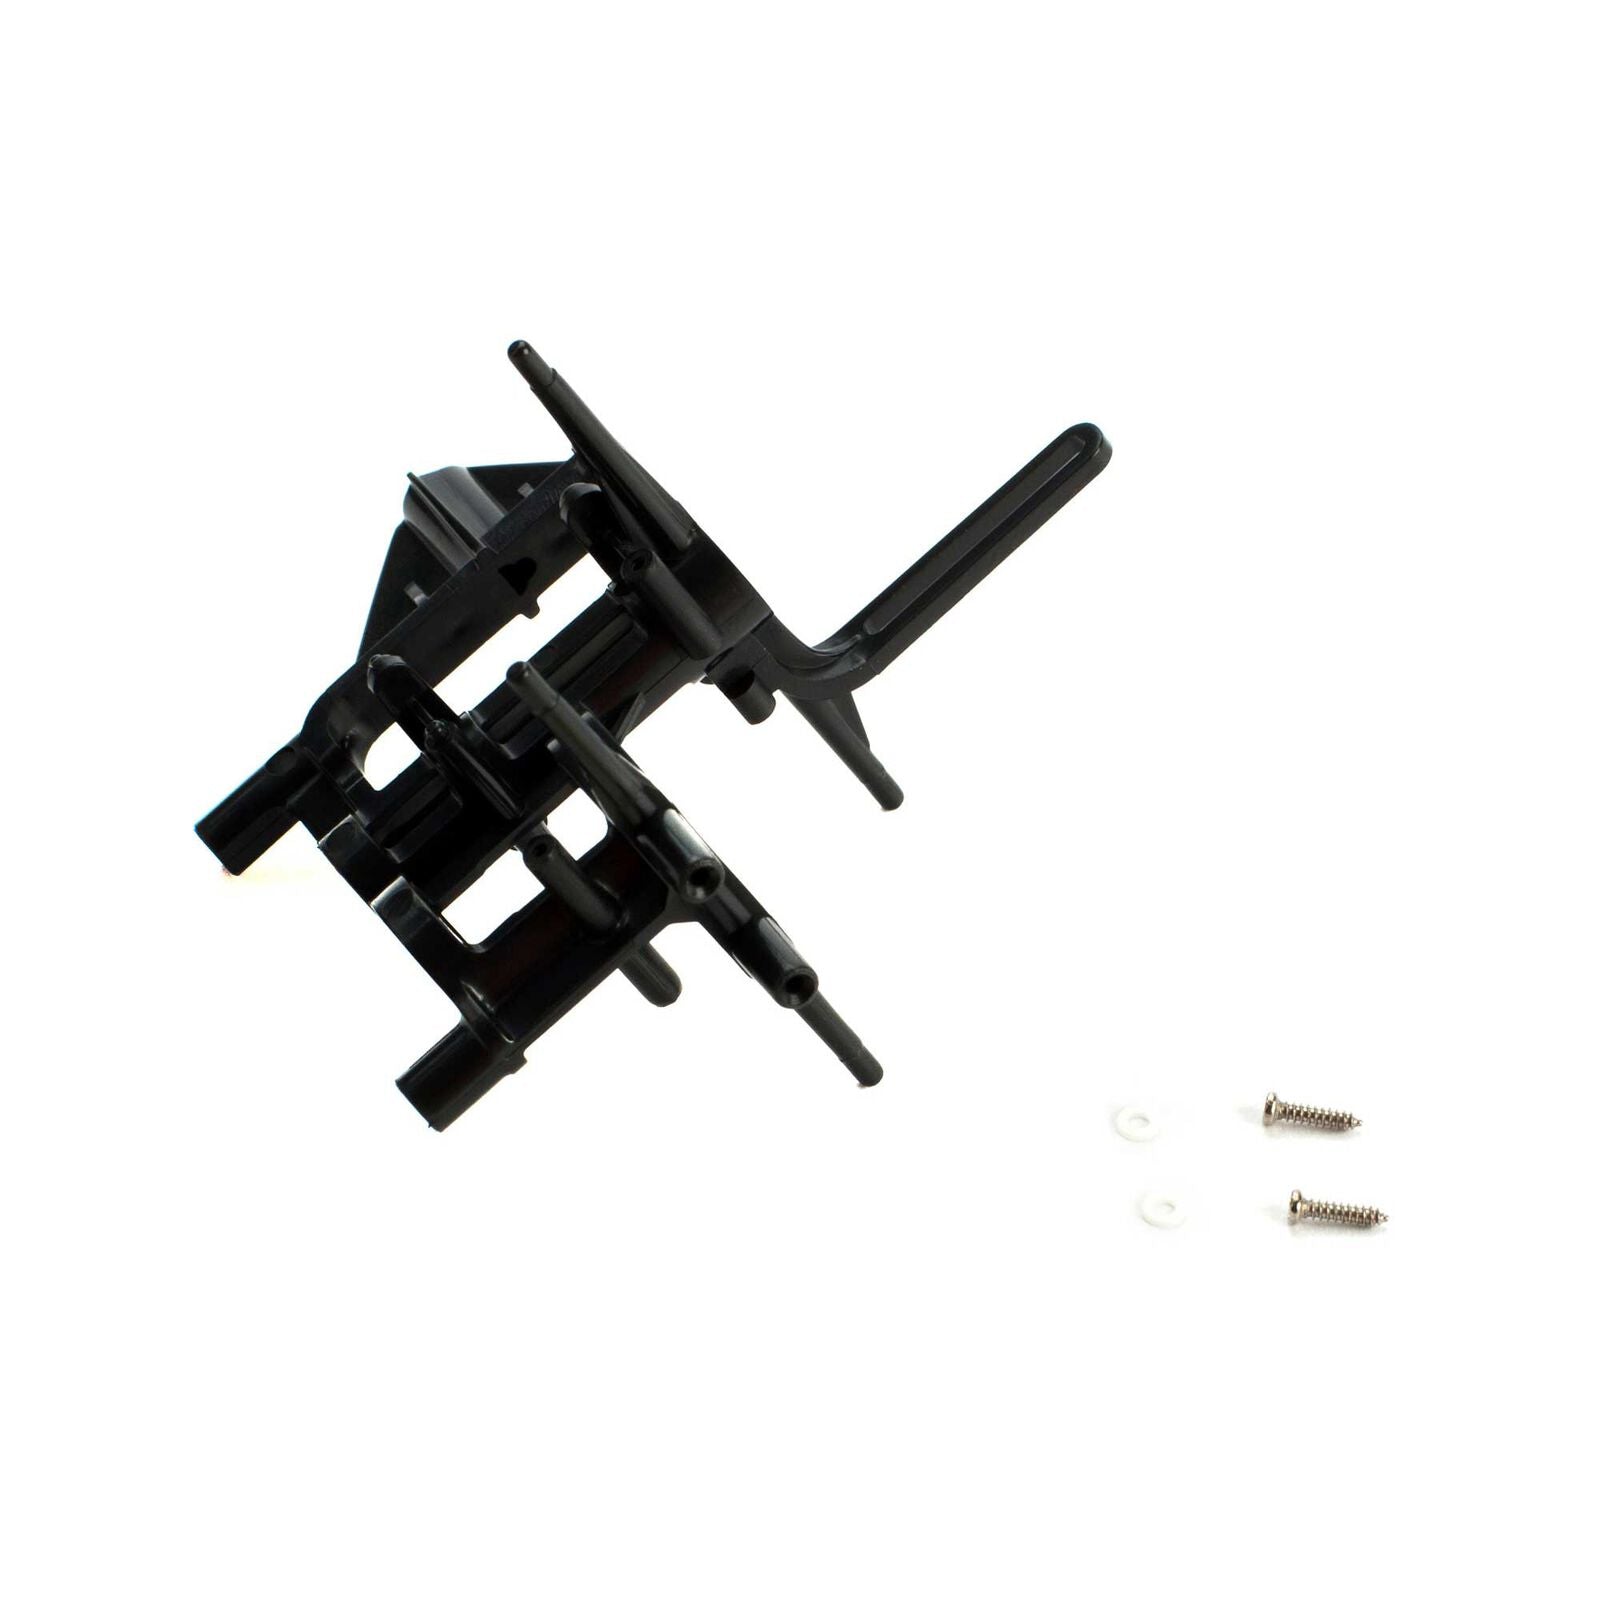 EFLITE BLADE BLH3906 Main Frame with Hardware: mCP X BL